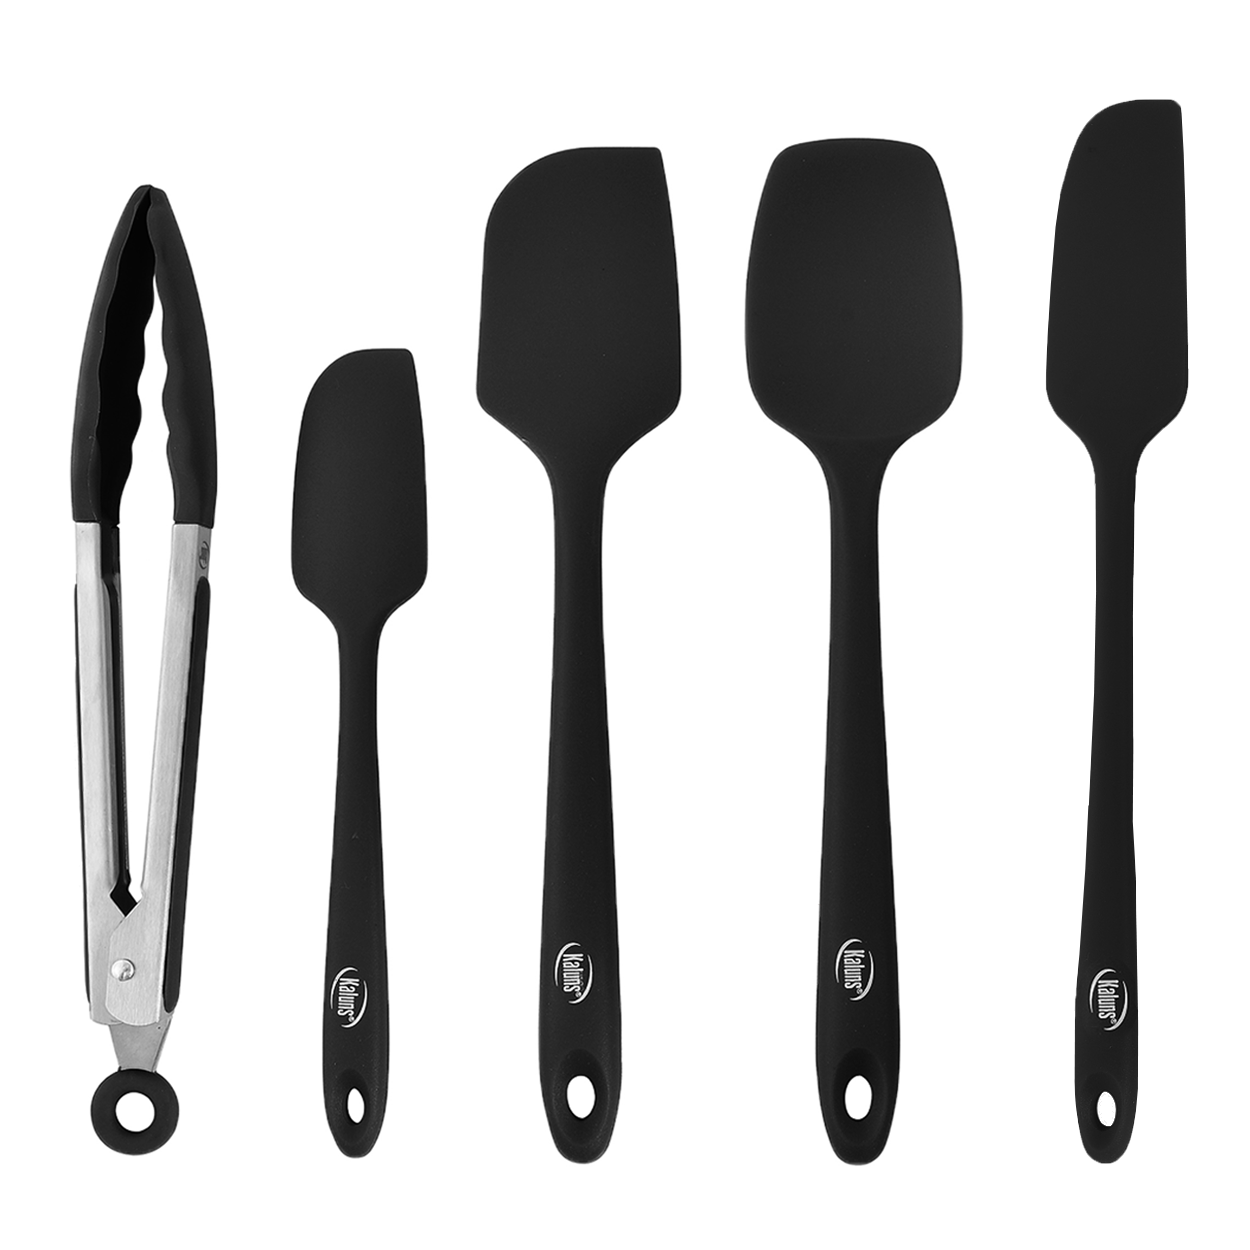 Heat Resistant Rubber Silicone Spatula (Set of 5)